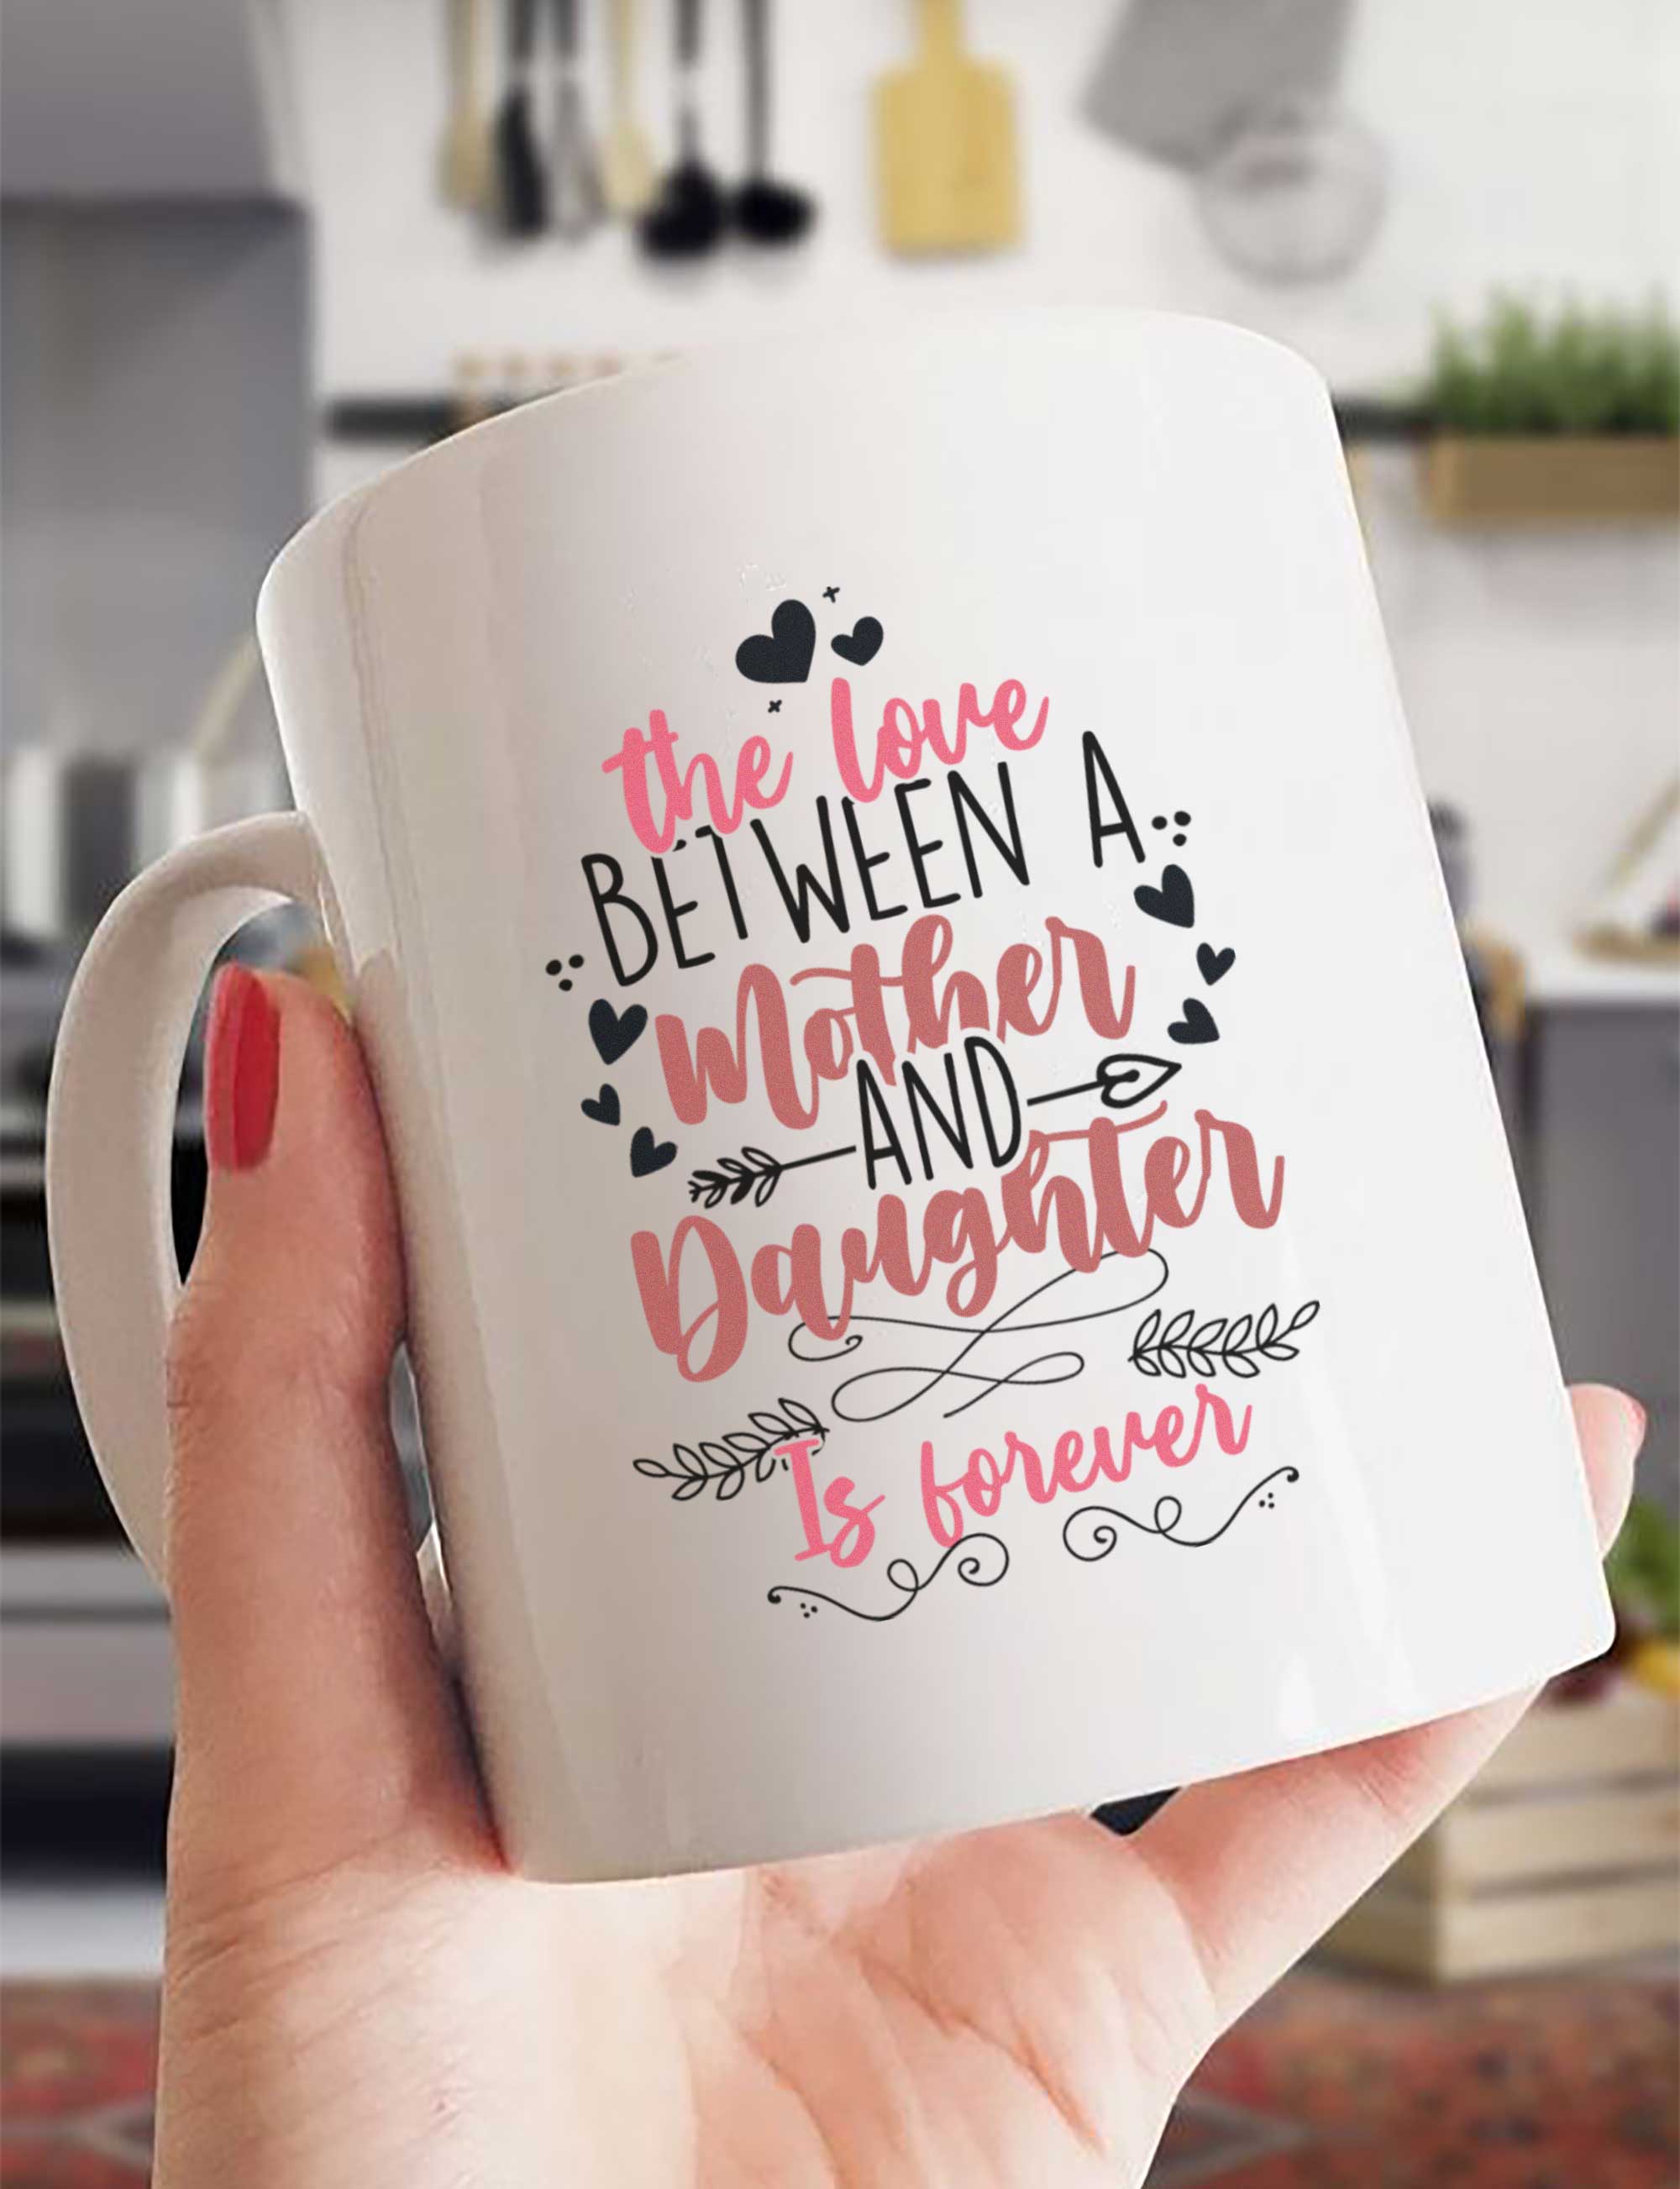 The Love Between Mother And Daughter Is Forever - White Mug MG14